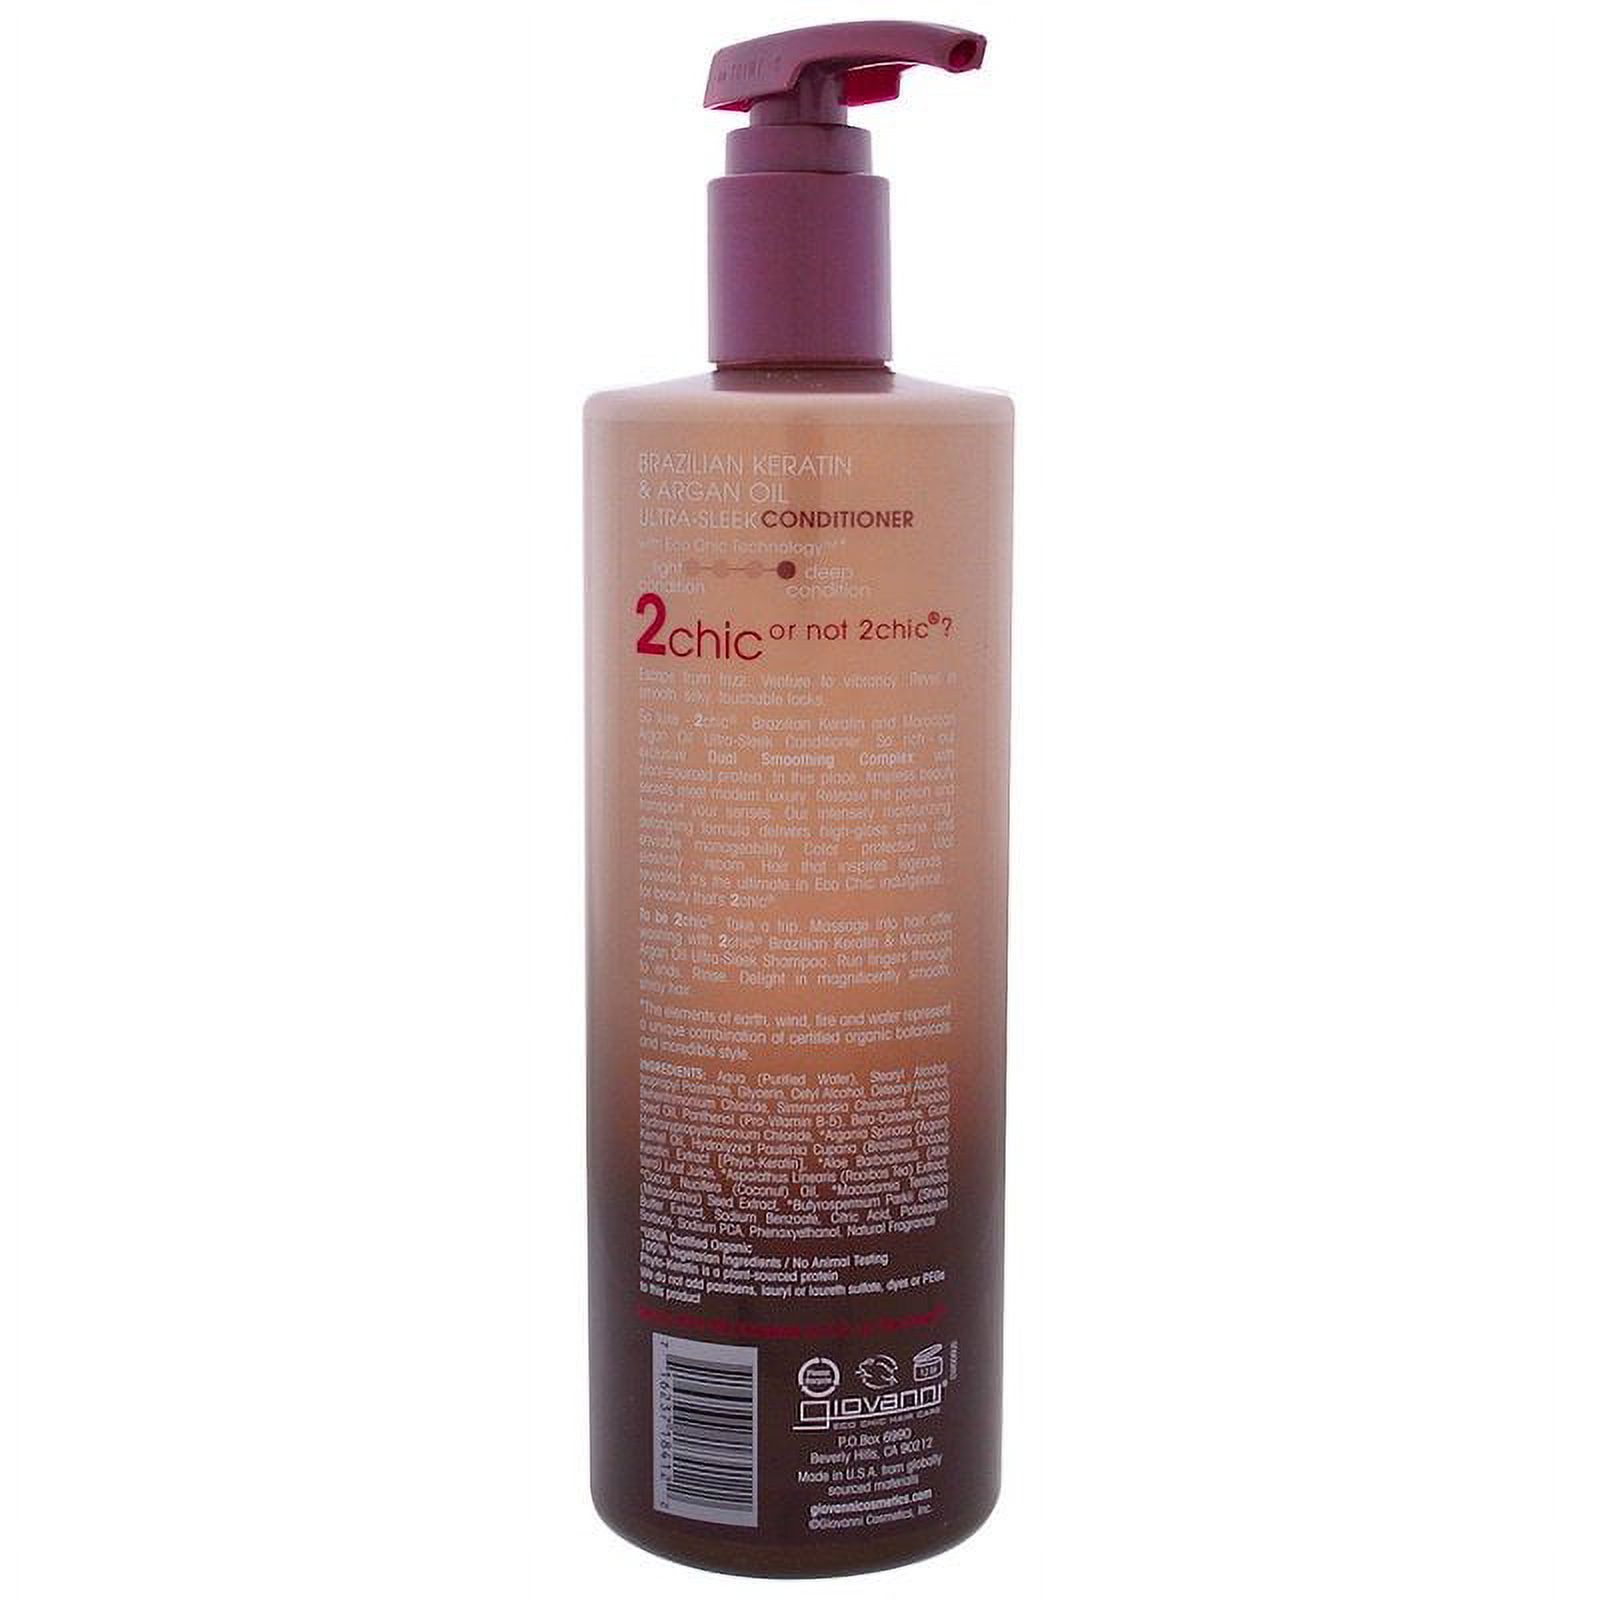 Giovanni Ultra Sleek Conditioner Brazilian Keratin and Argan Oil, Sulfate Free, No Parabens, 24 oz with Pump - image 7 of 7